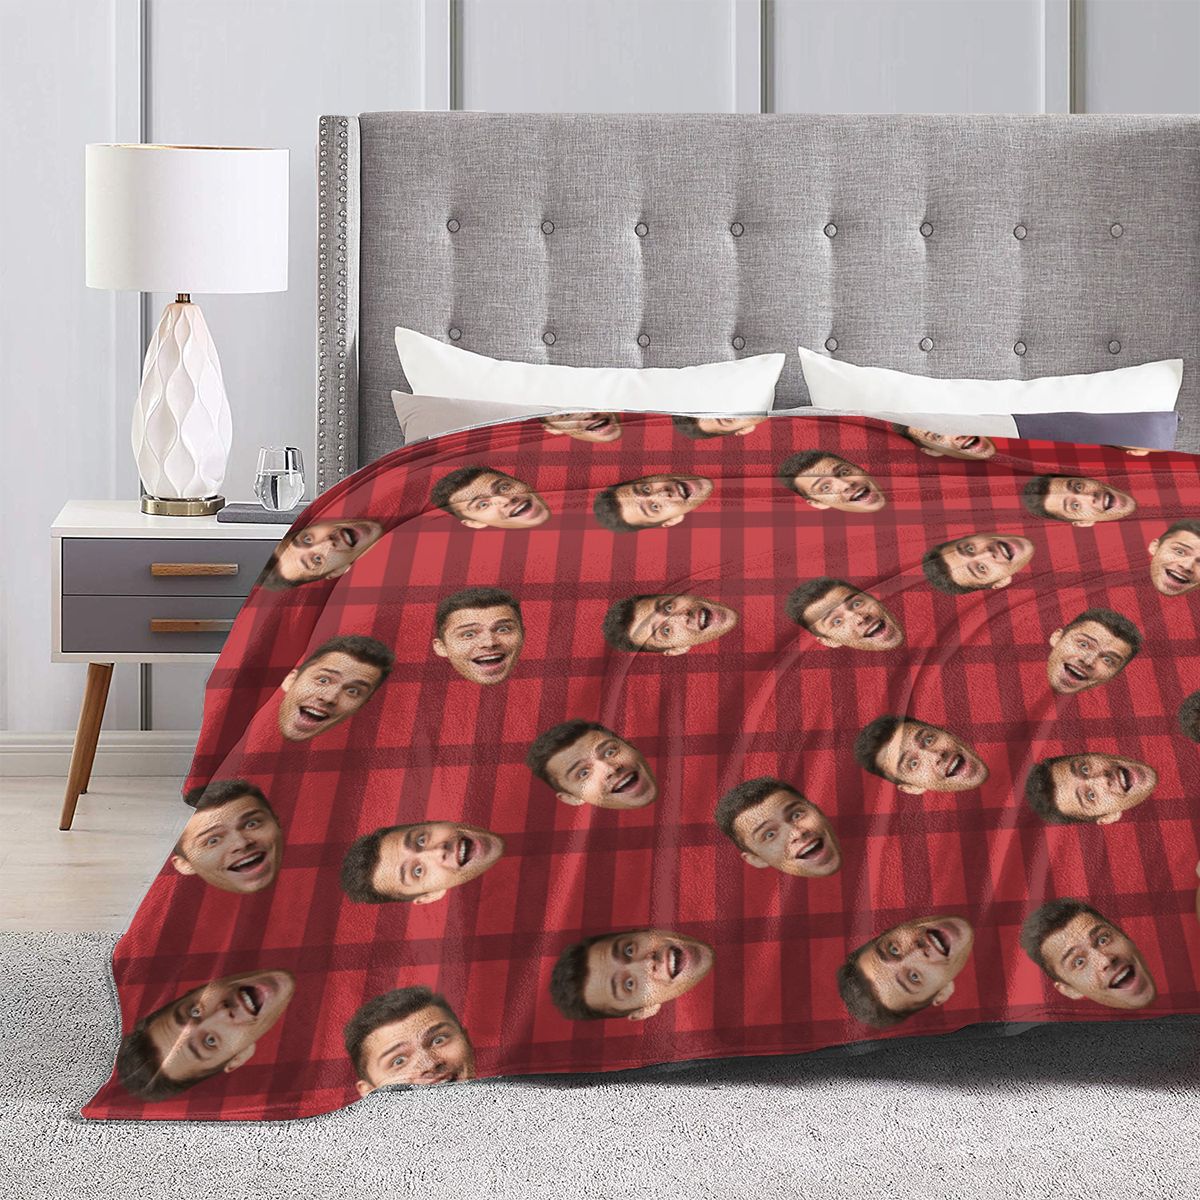 Custom Face Blanket Personalized Photo Blanket Gifts